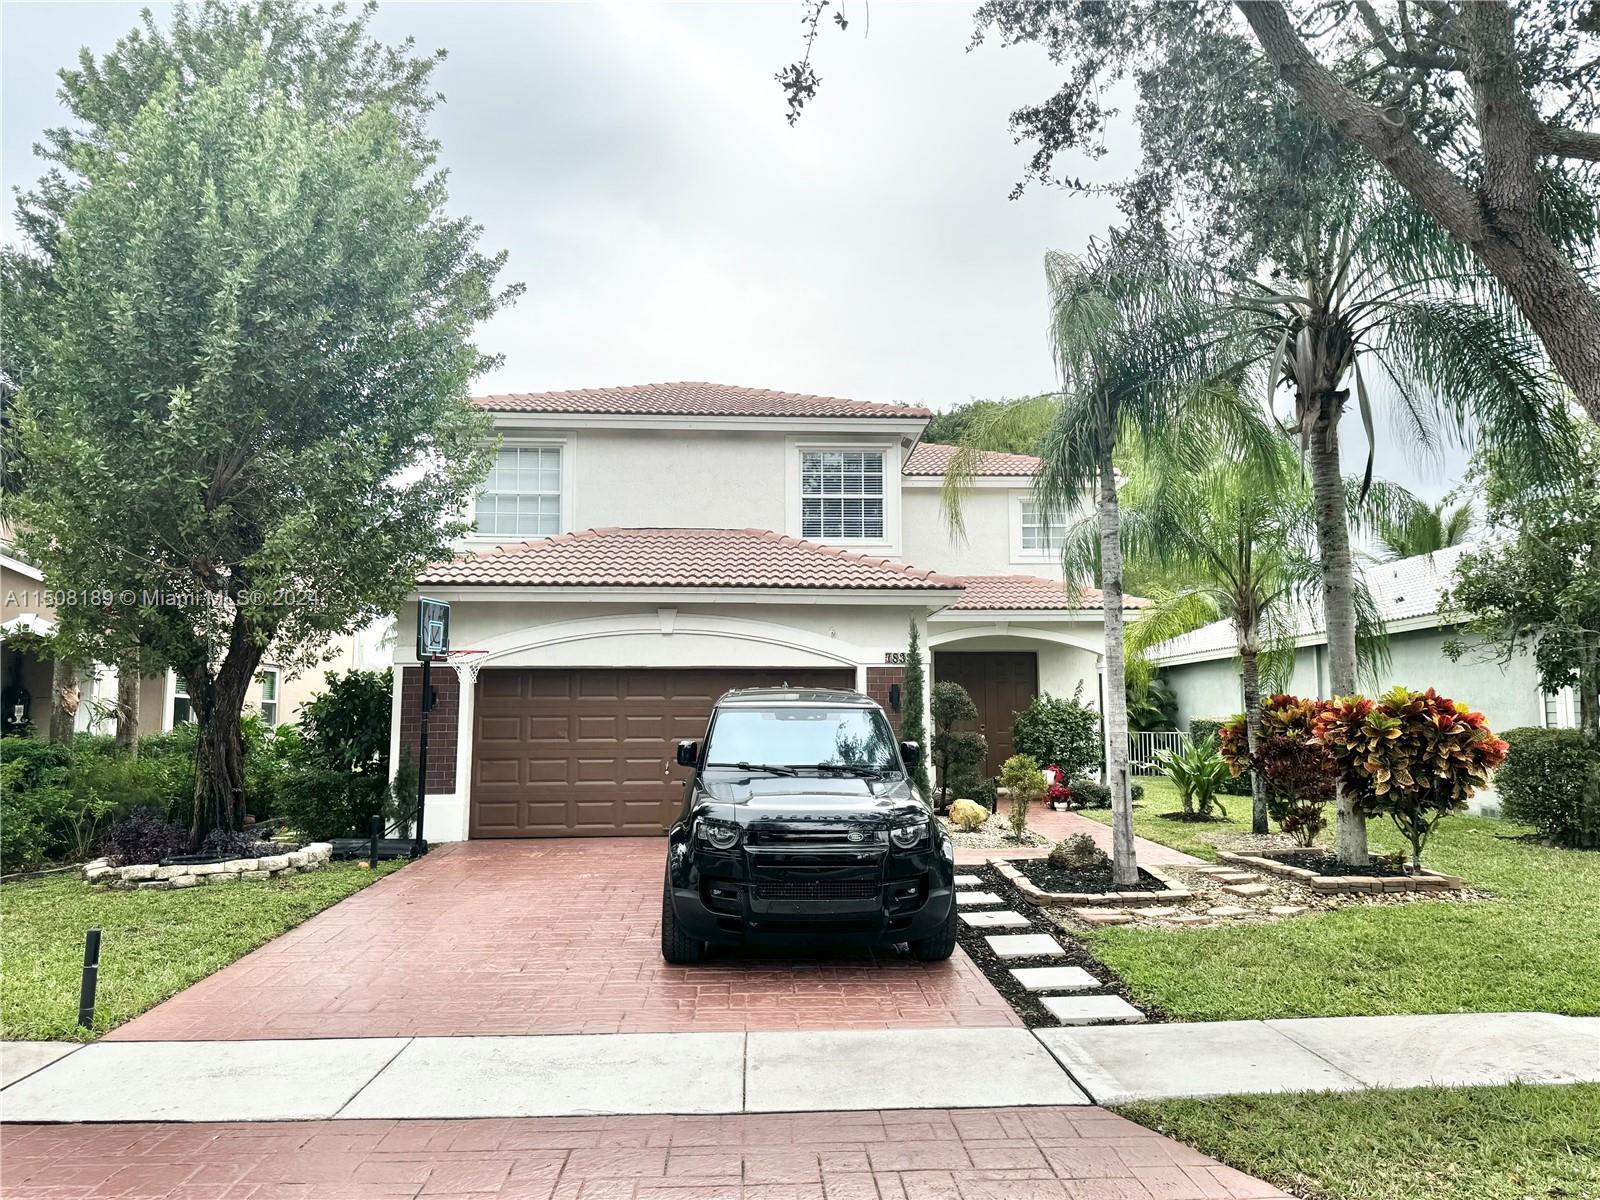 Photo of 7833 NW 70th Ave in Parkland, FL